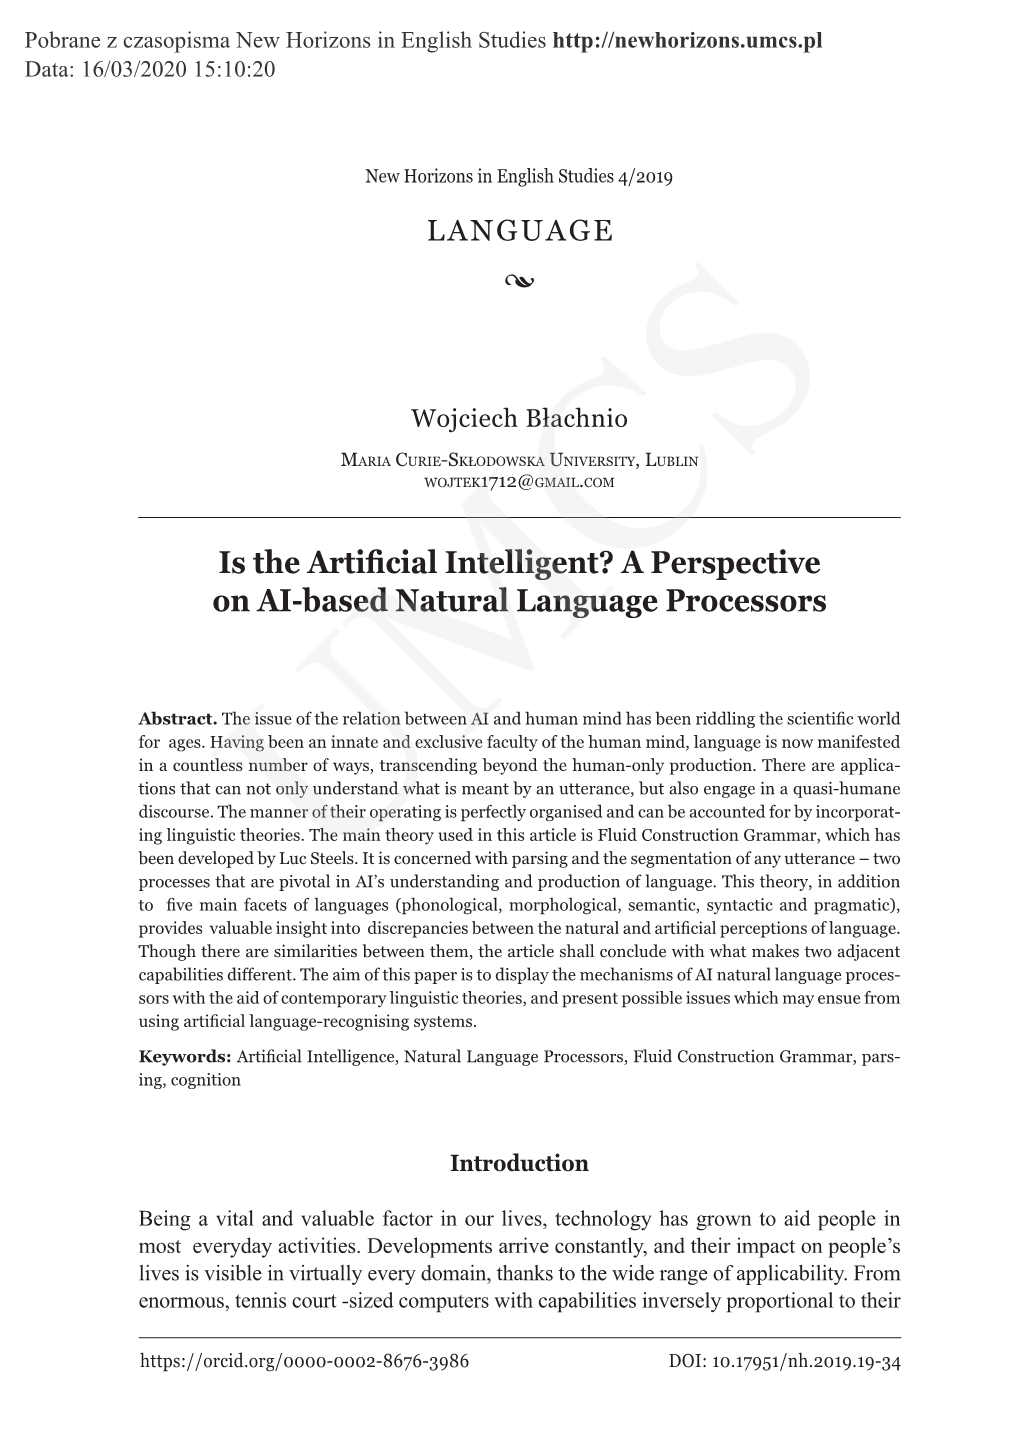 Is the Artificial Intelligent? a Perspective on AI-Based Natural Language Processors